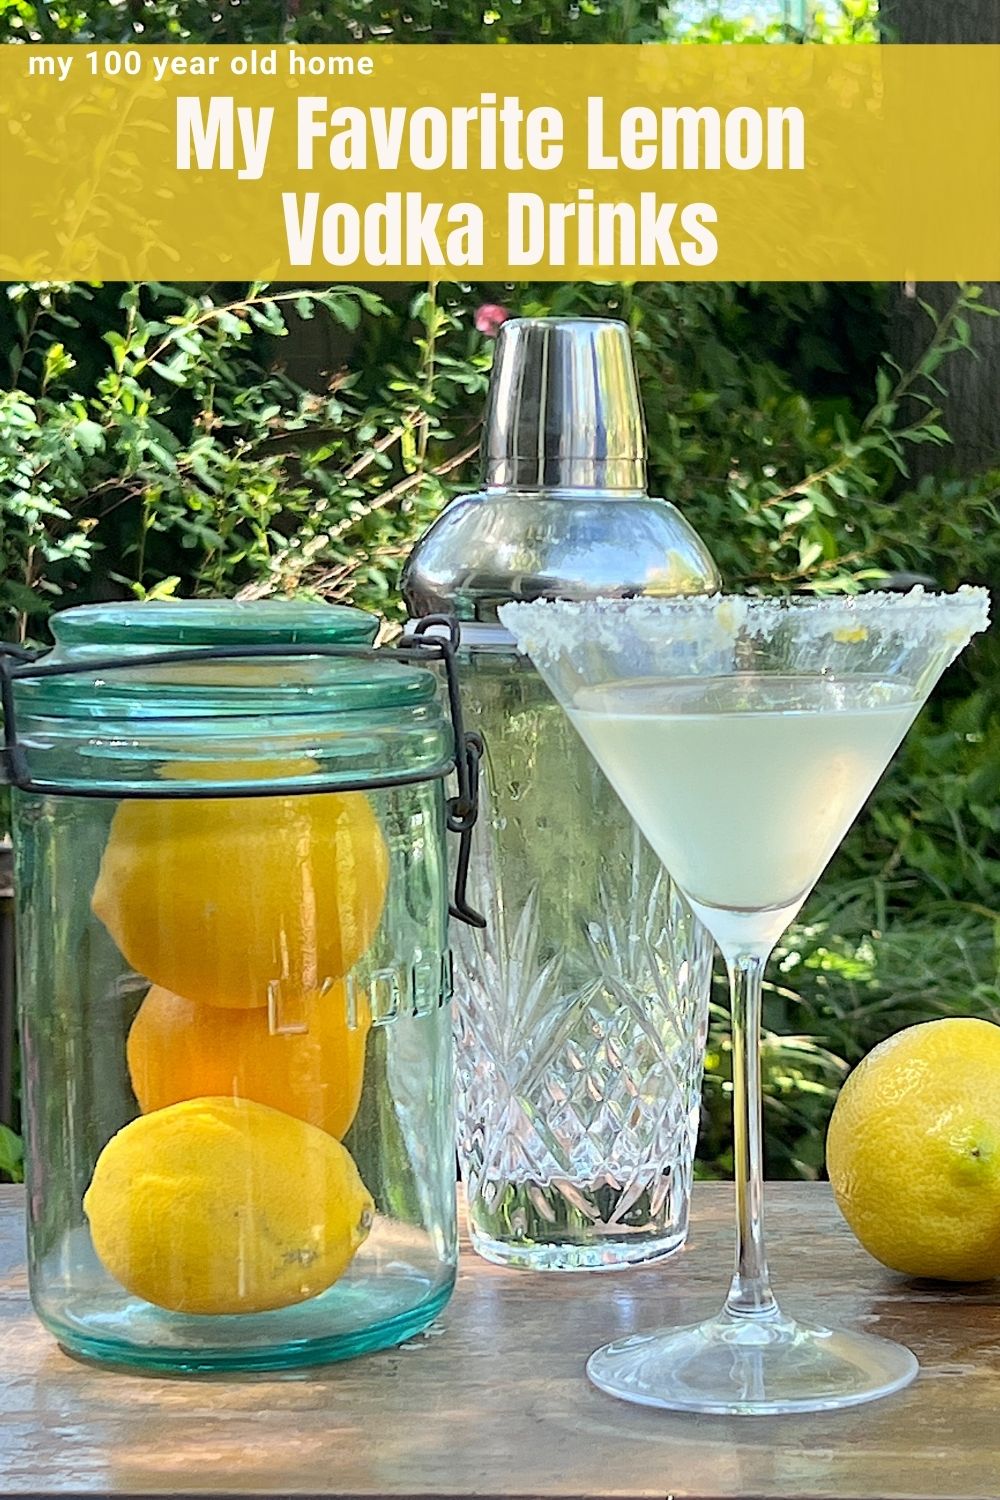 I love everything about lemons and I have put together some of my favorite lemon vodka drinks. These are popular in our home all year long.